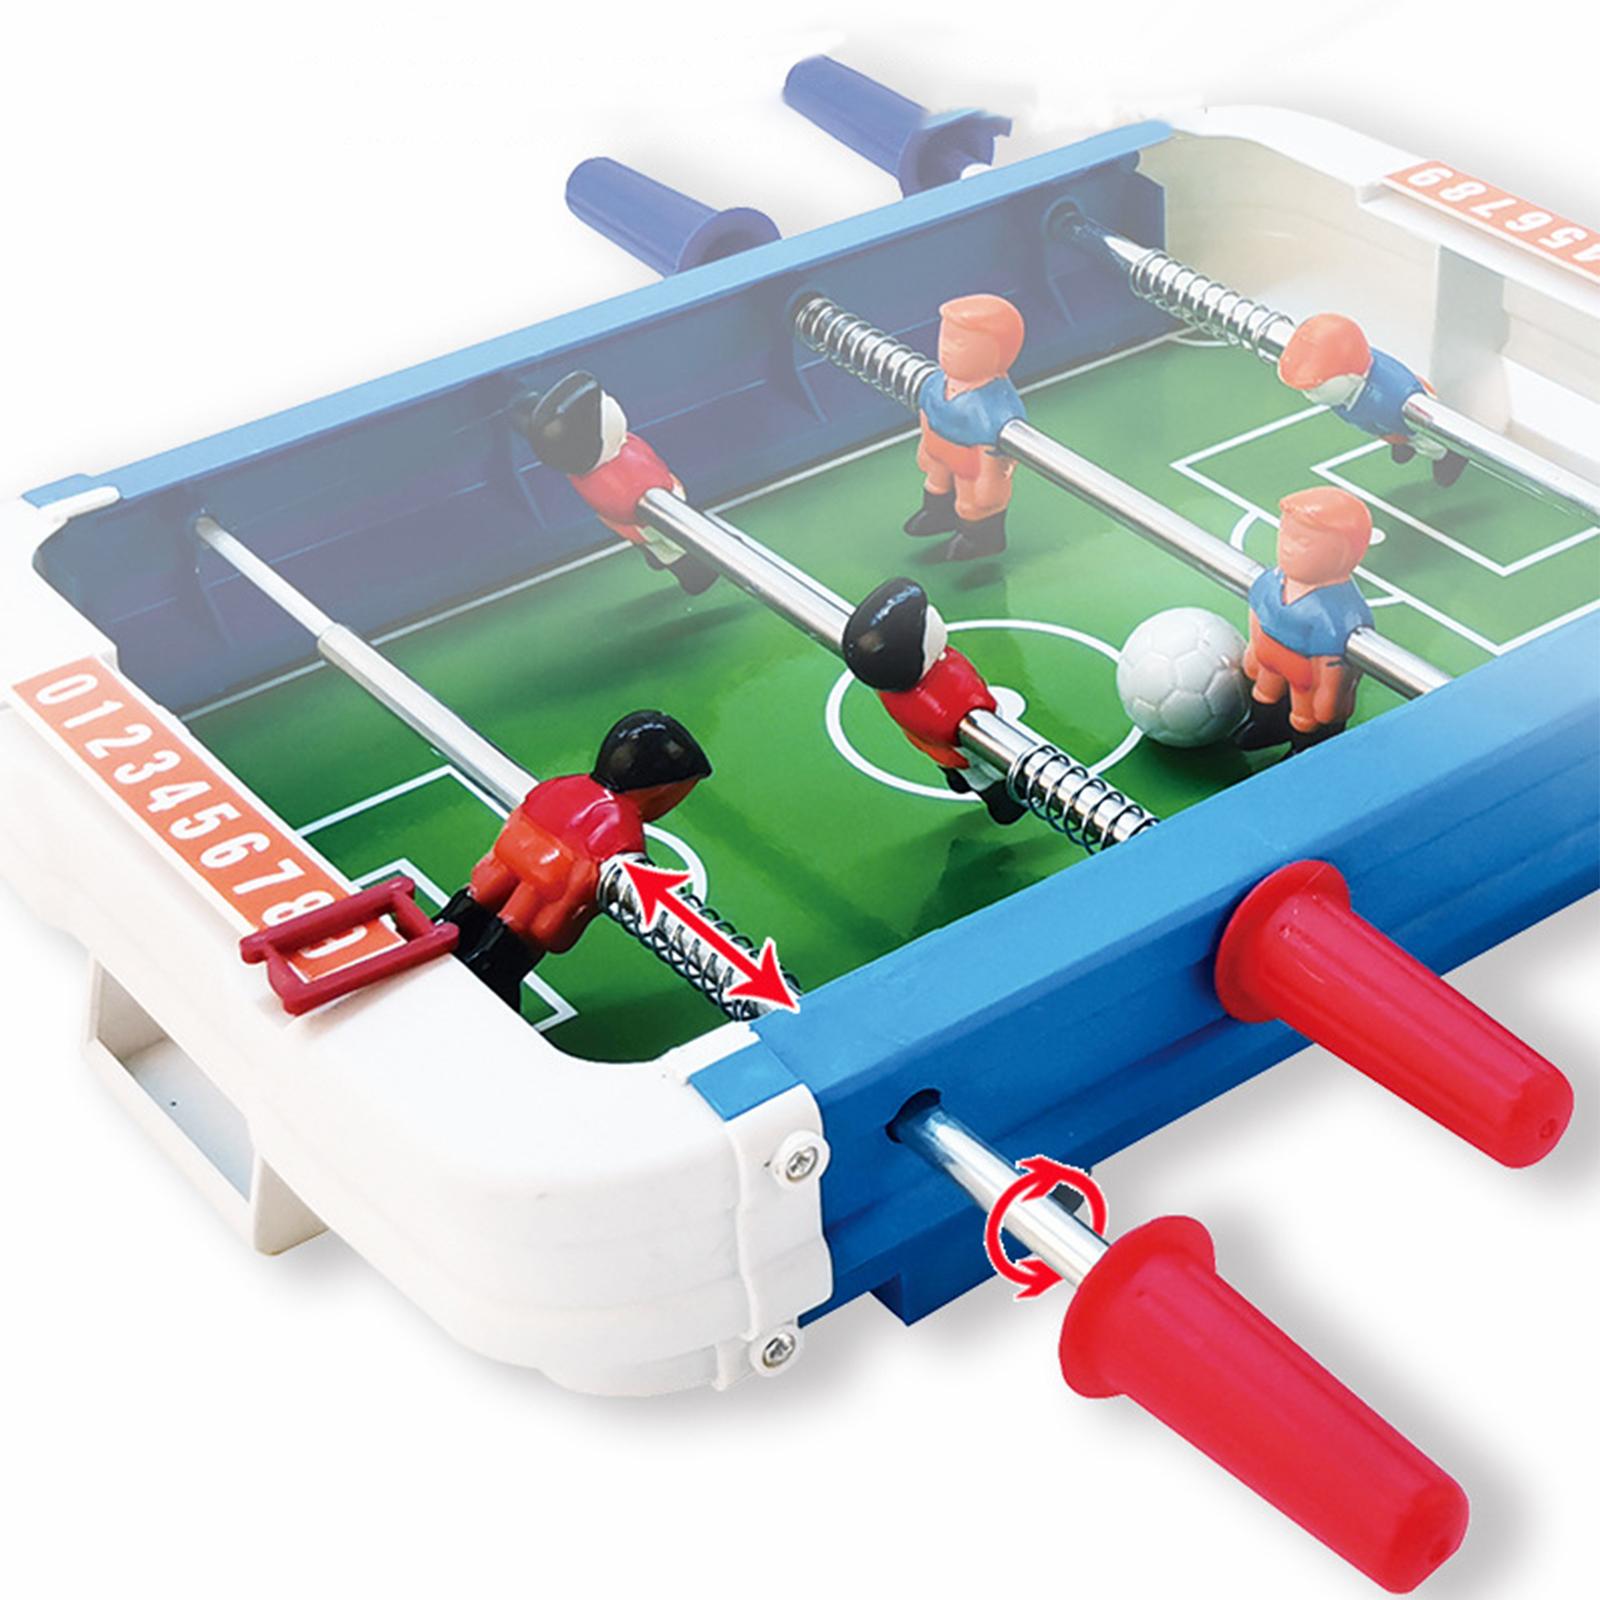 Foosball Table Tabletop Football Game Interactive Toy for Game Rooms Kids Argent